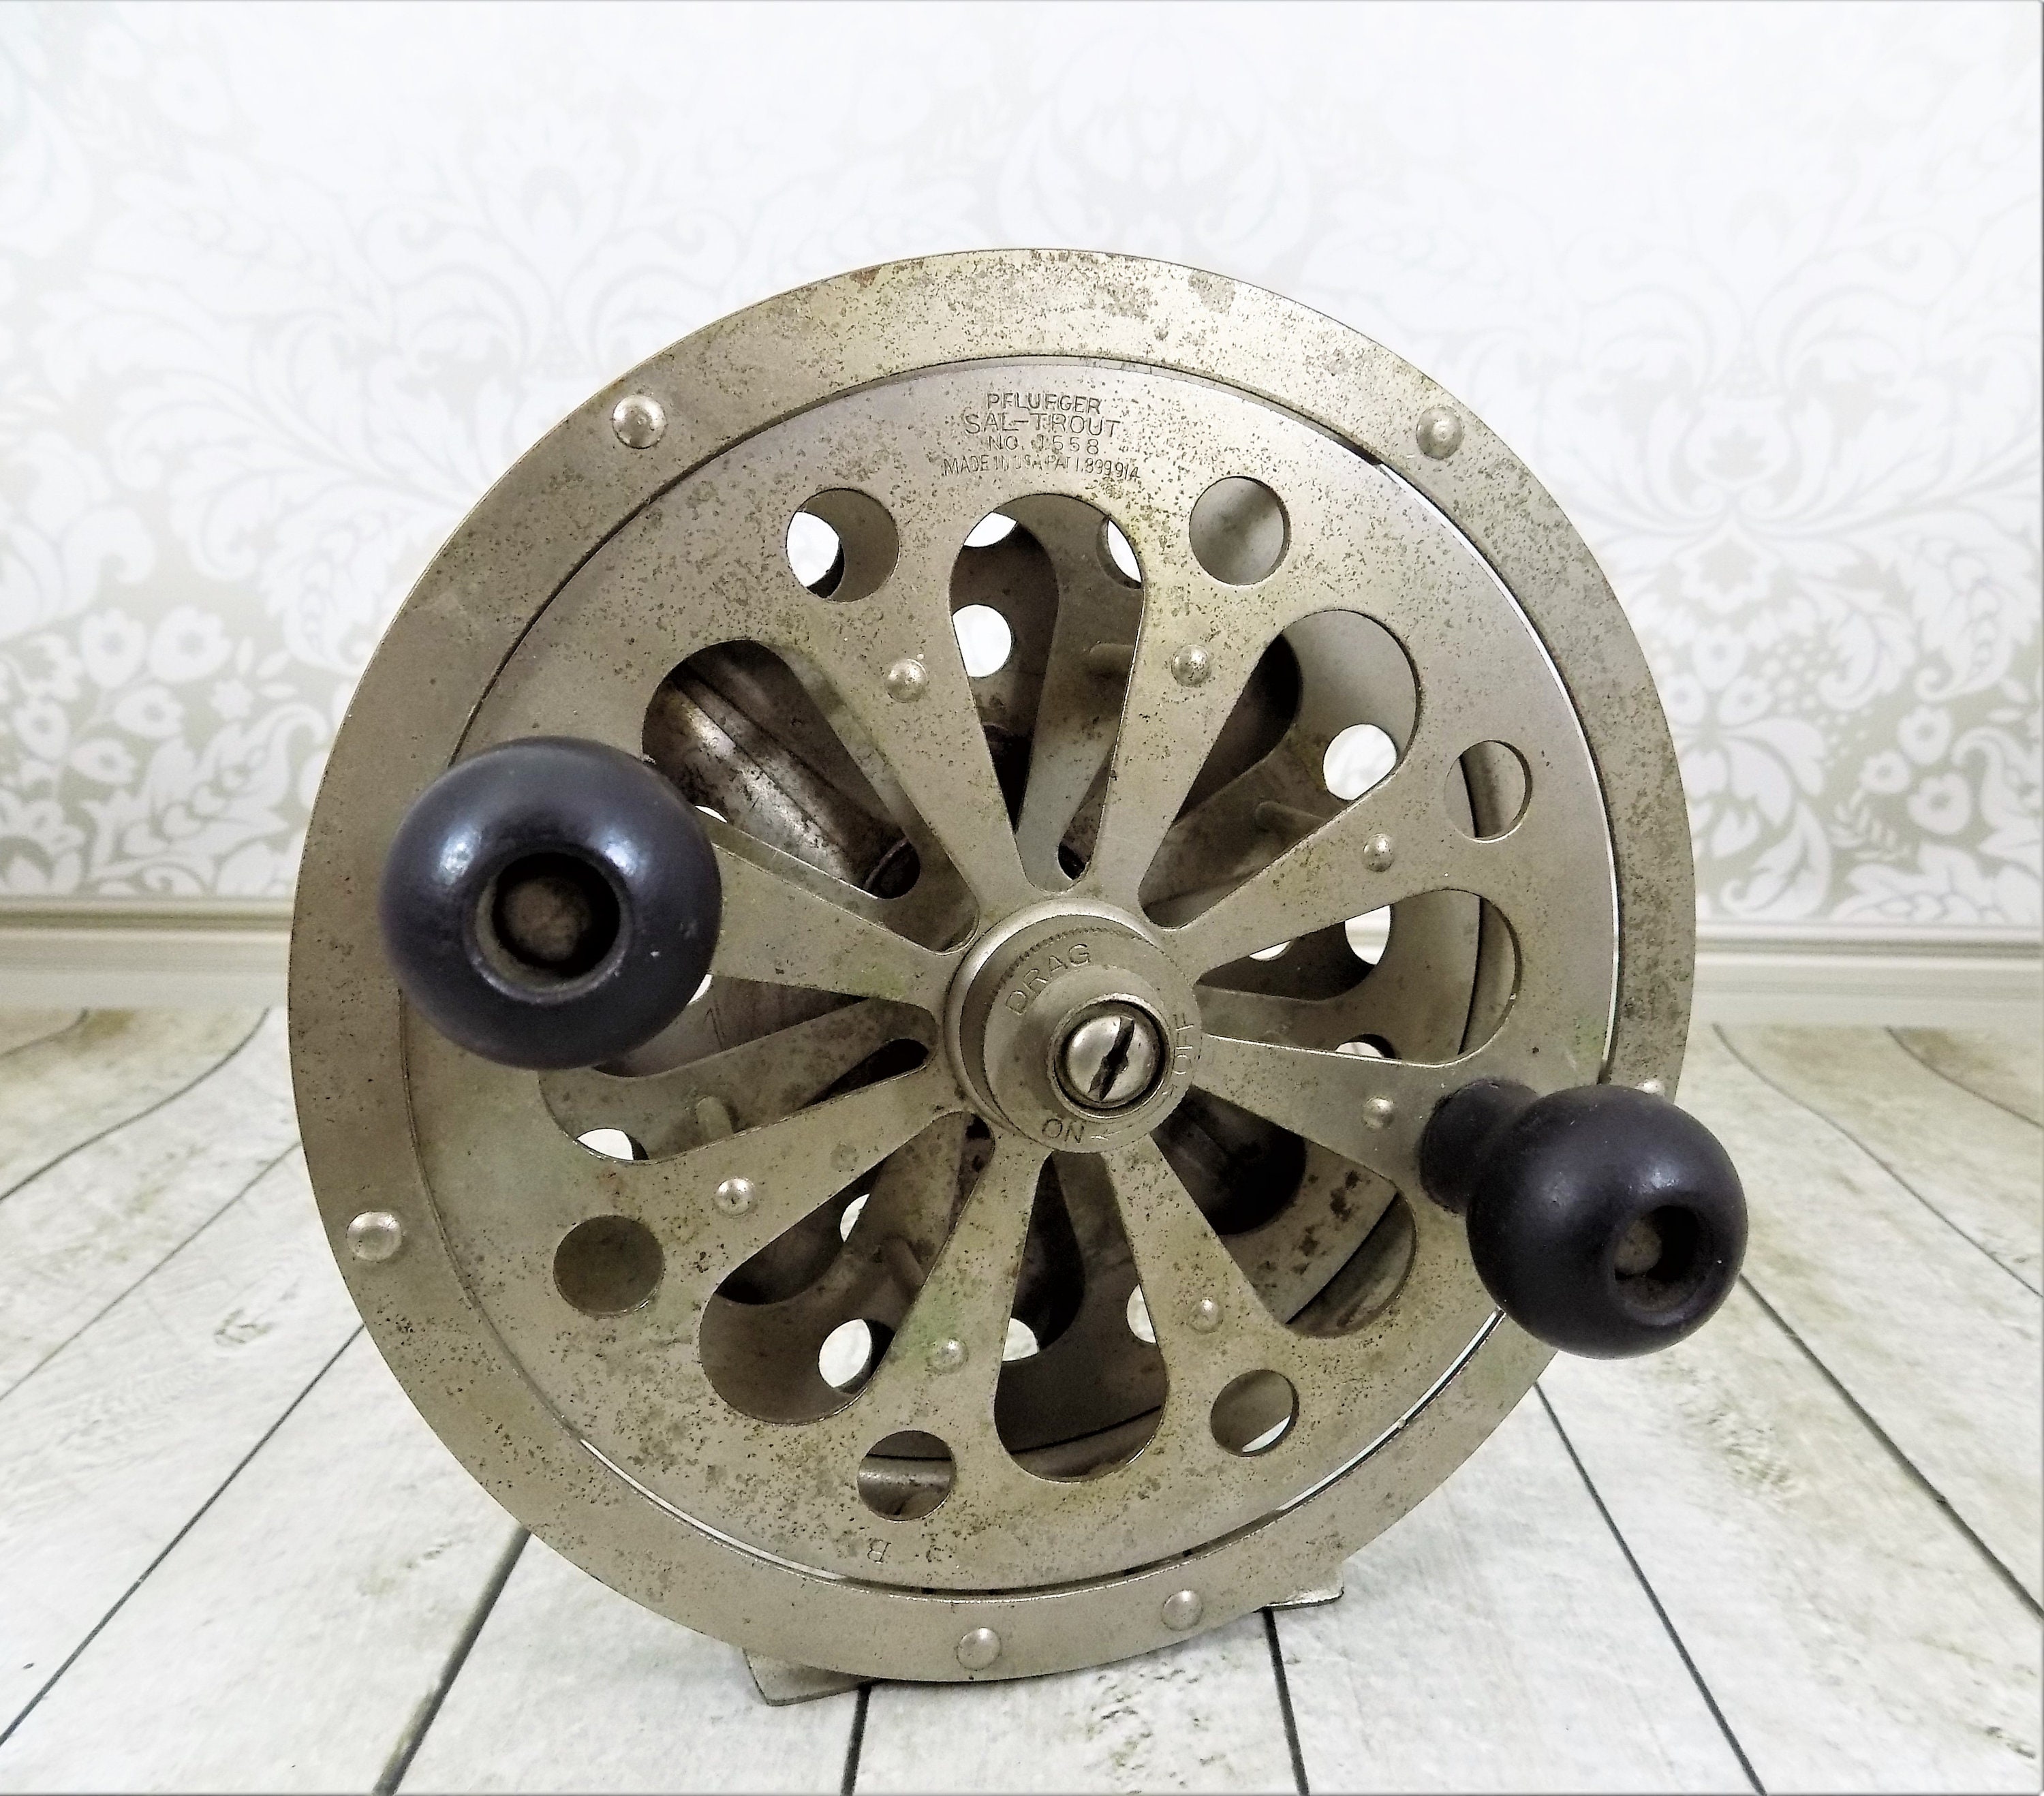 Pflueger 1558 Sal-trout Fishing Reel, Made in USA, Trolling Reel, Single  Action, Vintage Fishing, Father's Day Gifts 